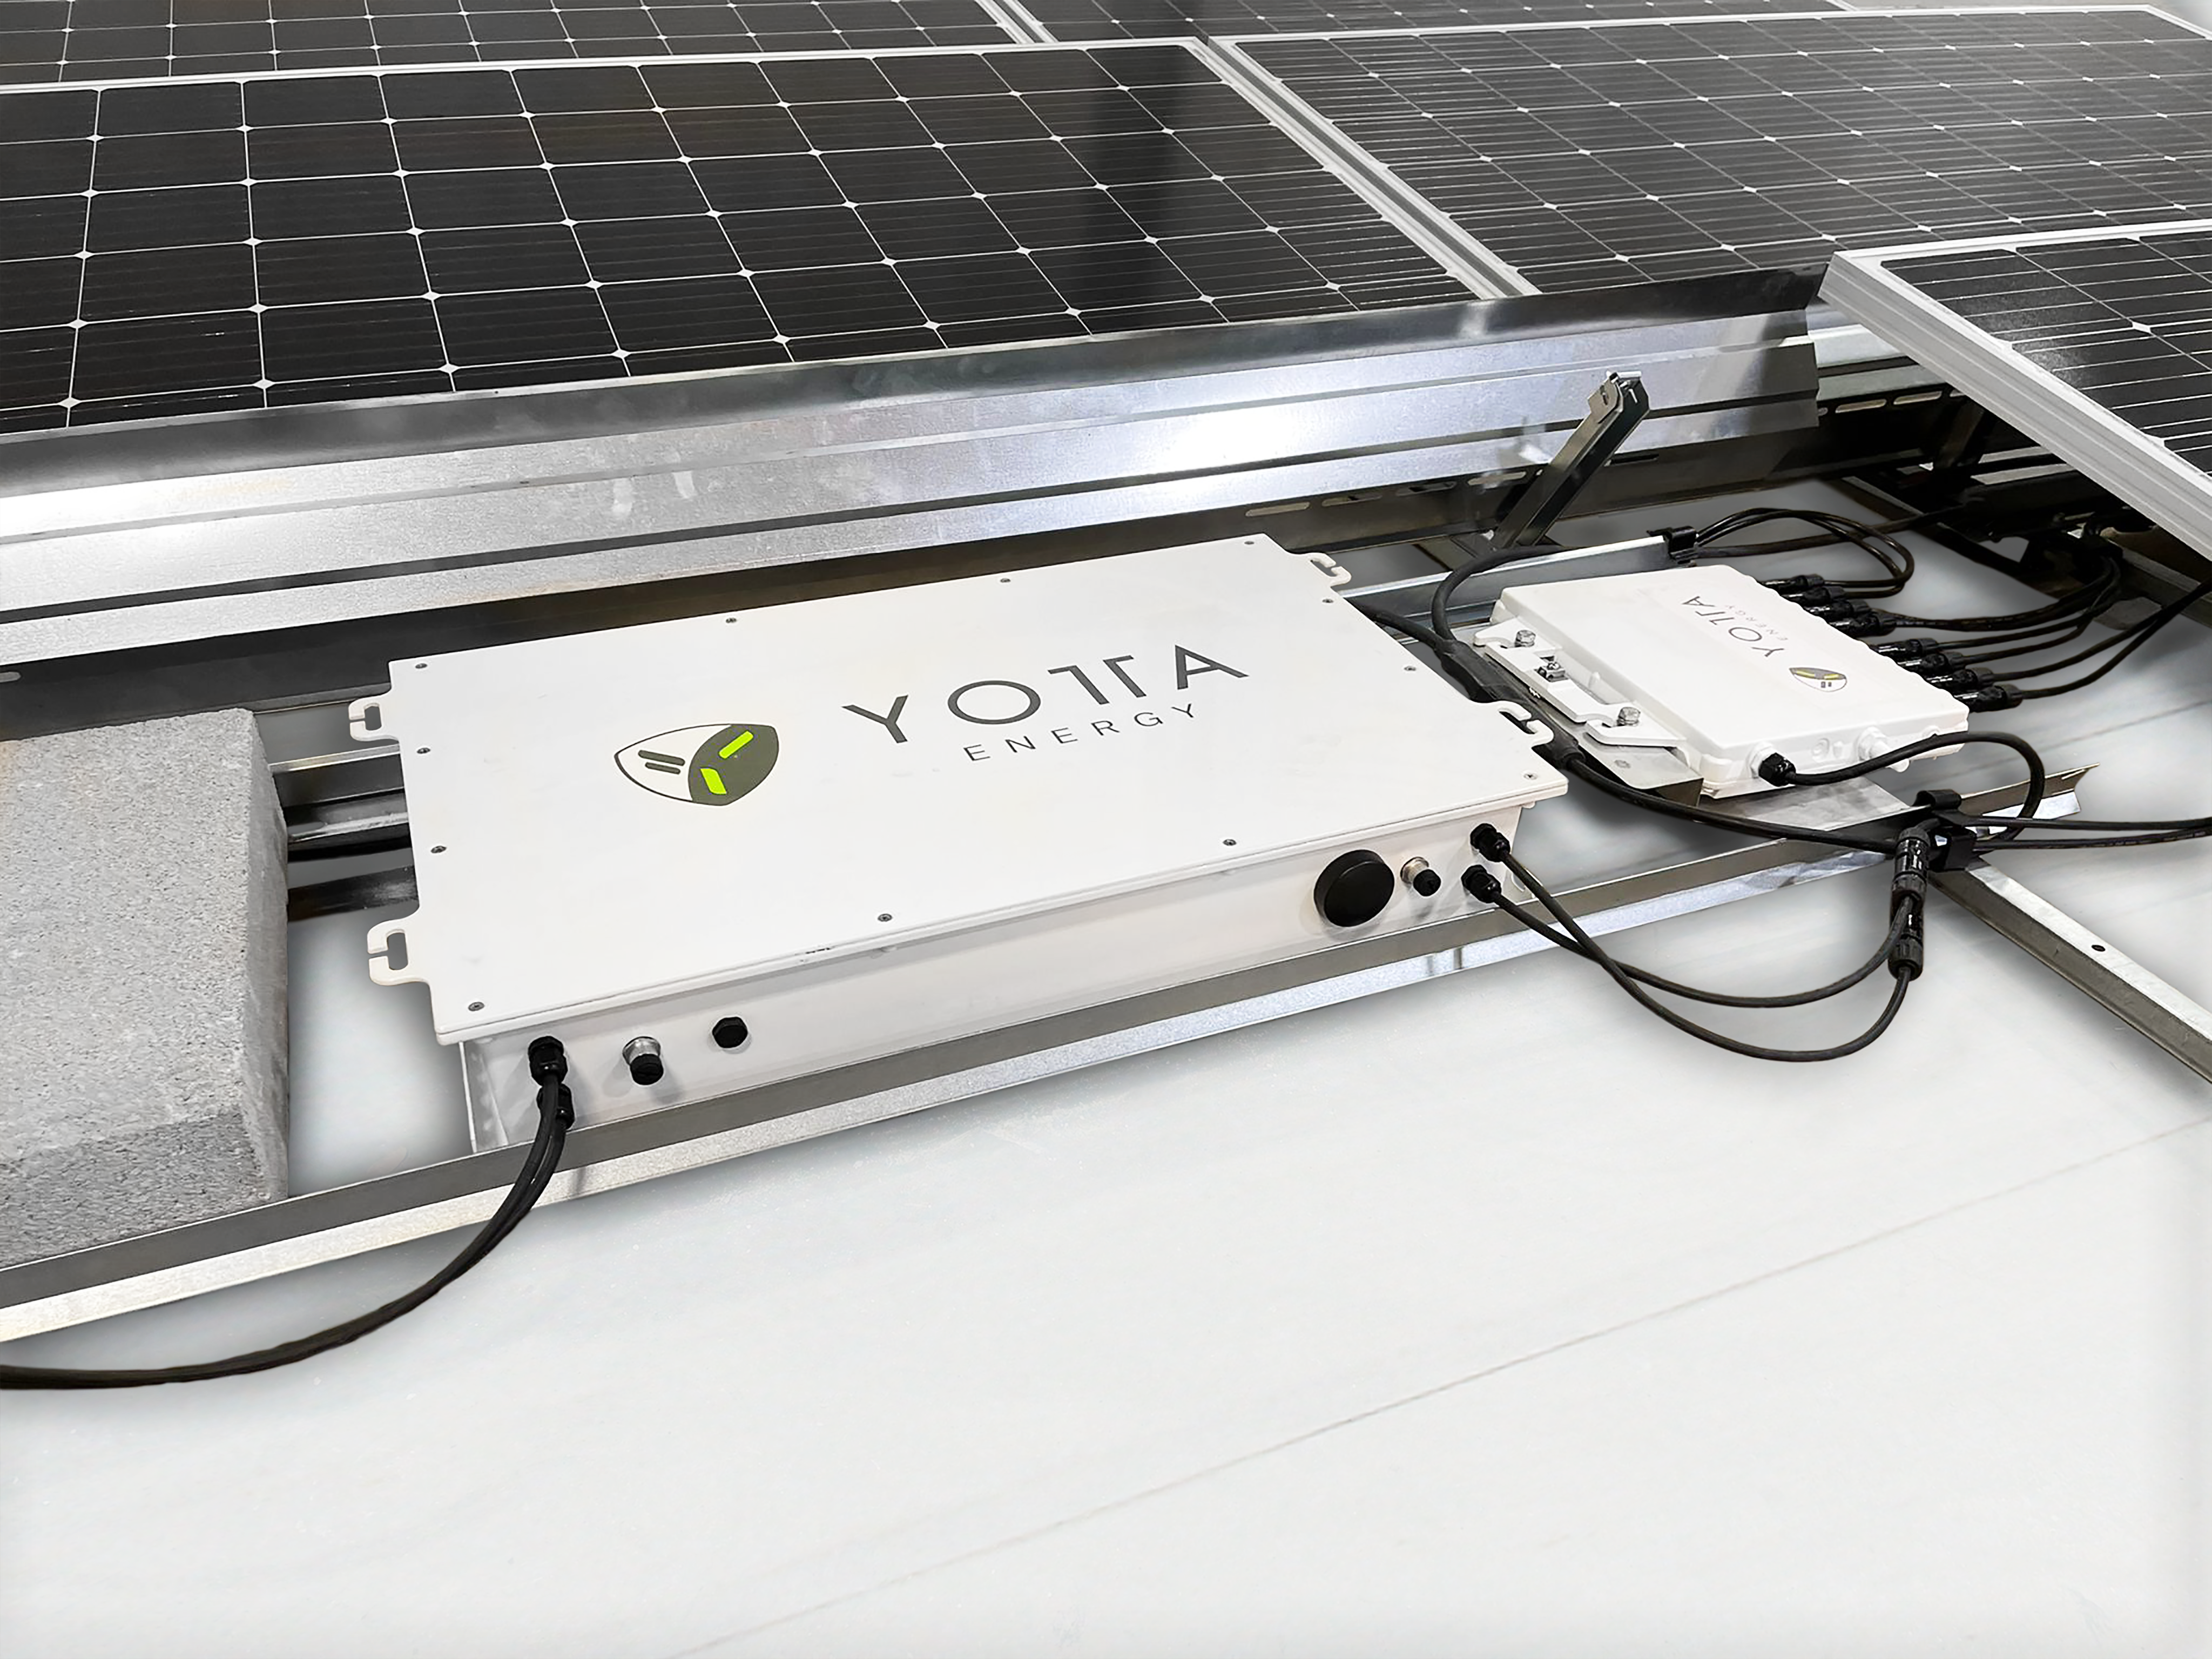 Deploying 1 kWh batteries under solar panels to reduce the cost of solar and storage at commercial properties. (Image: Yotta Energy)